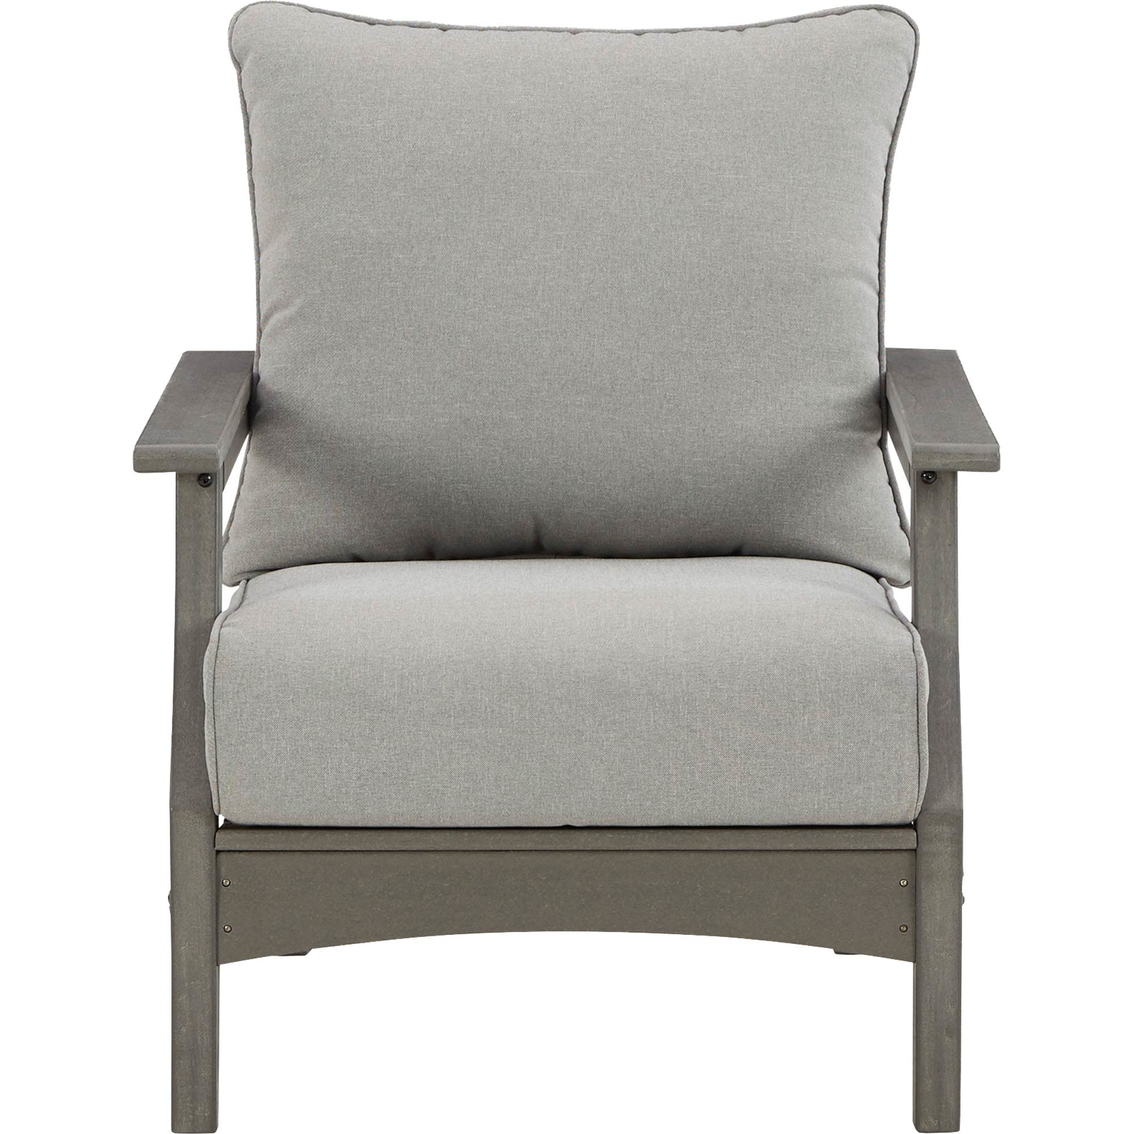 Signature Design by Ashley Visola Outdoor Lounge Chair 2 pk. - Image 3 of 6